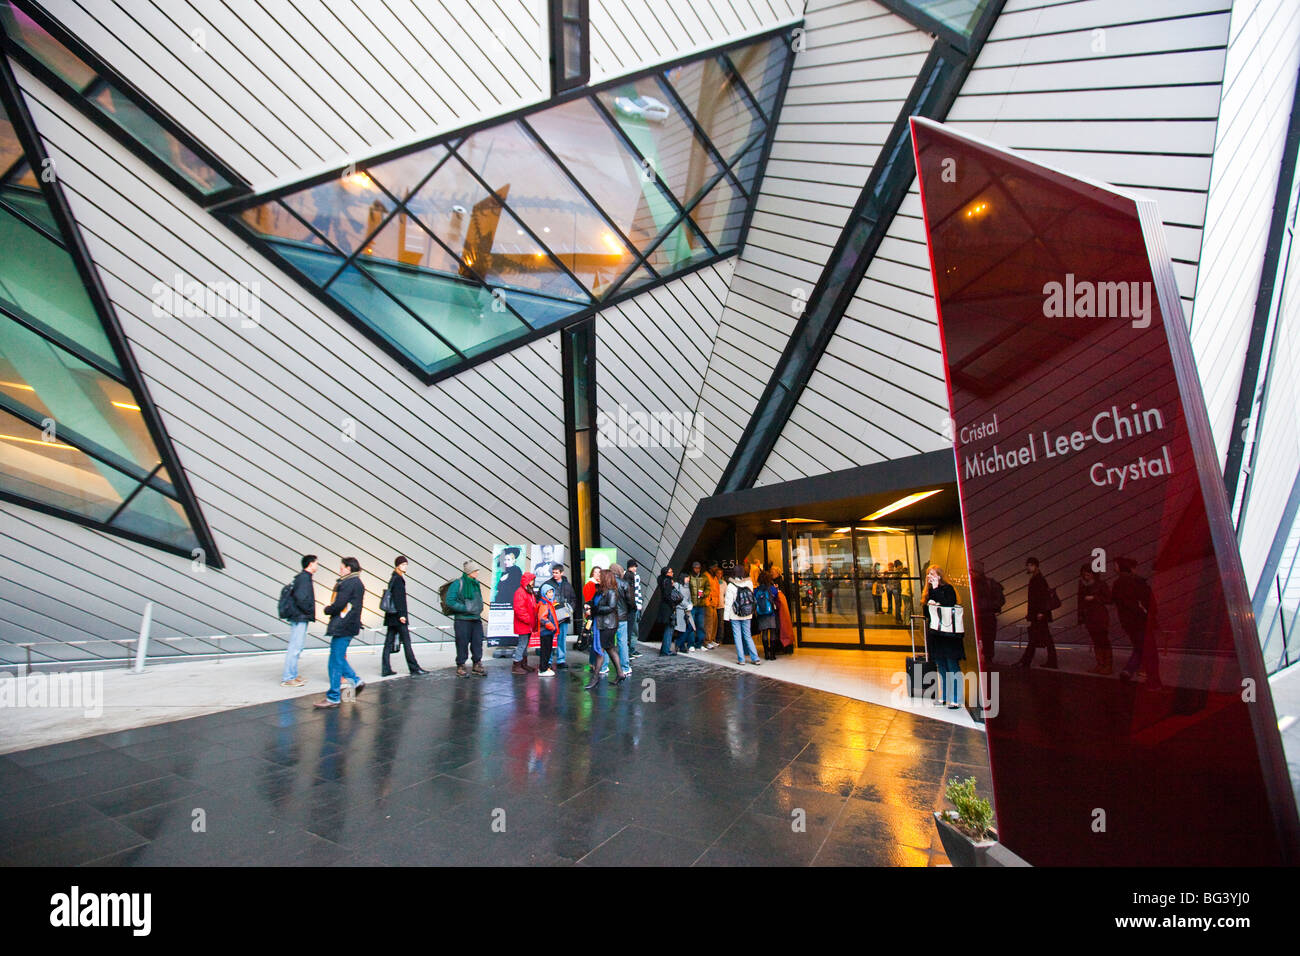 Il Royal Ontario Museum o ROM a Toronto in Canada Foto Stock